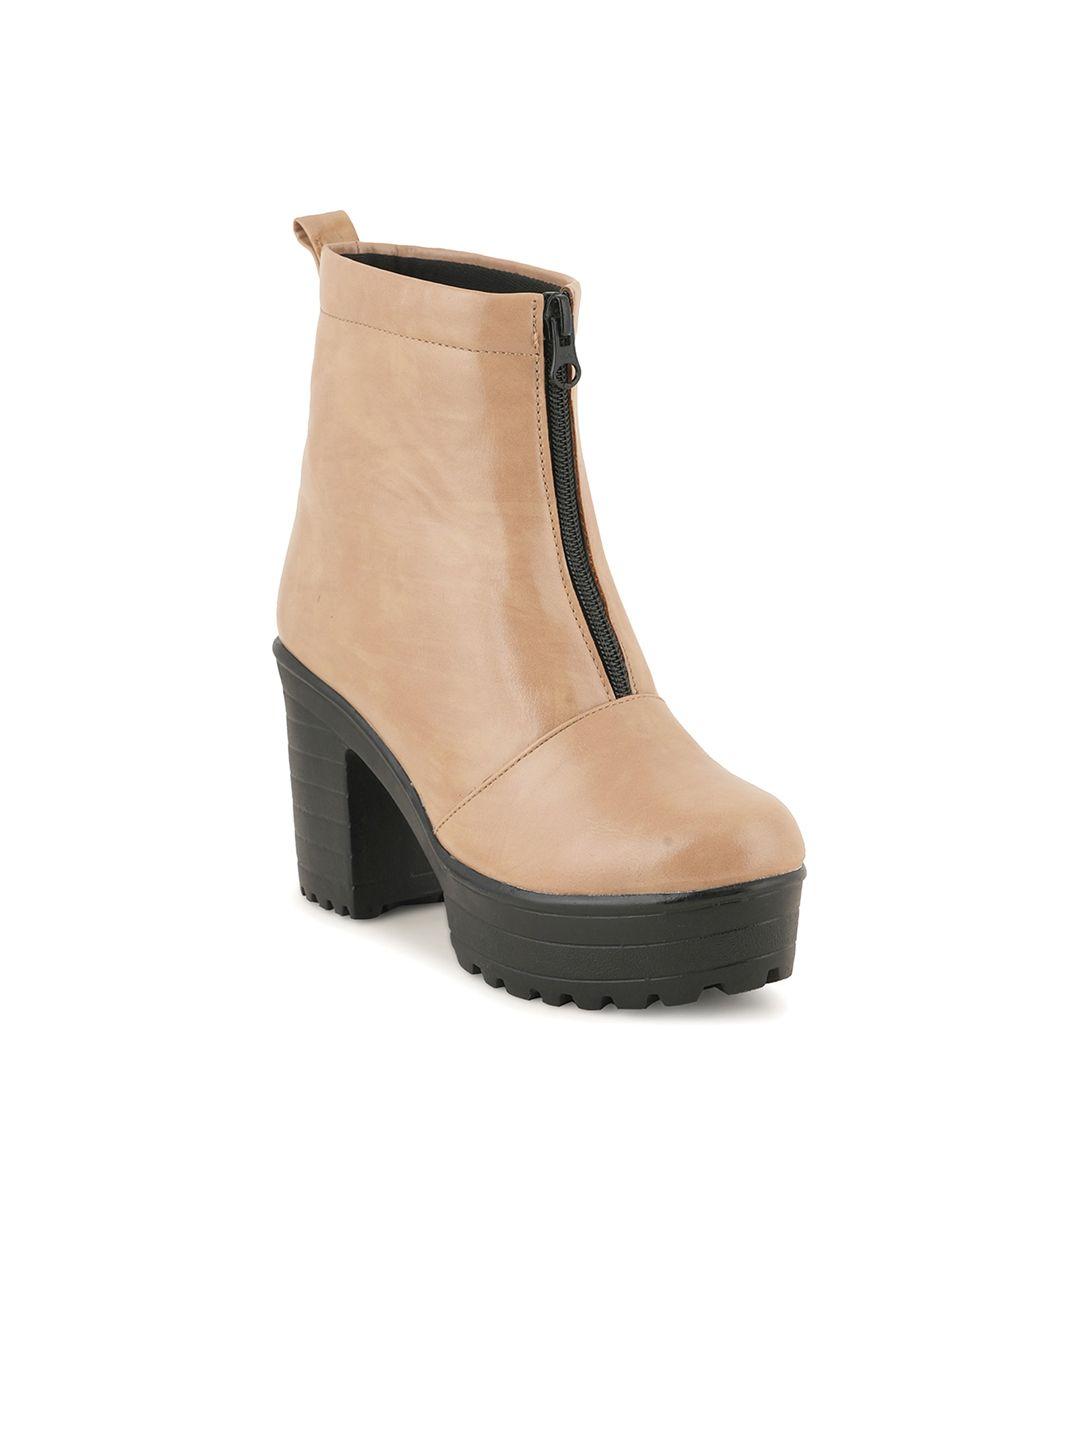 the roadster lifestyle co. women cream coloured mid top platform heel chunky boots